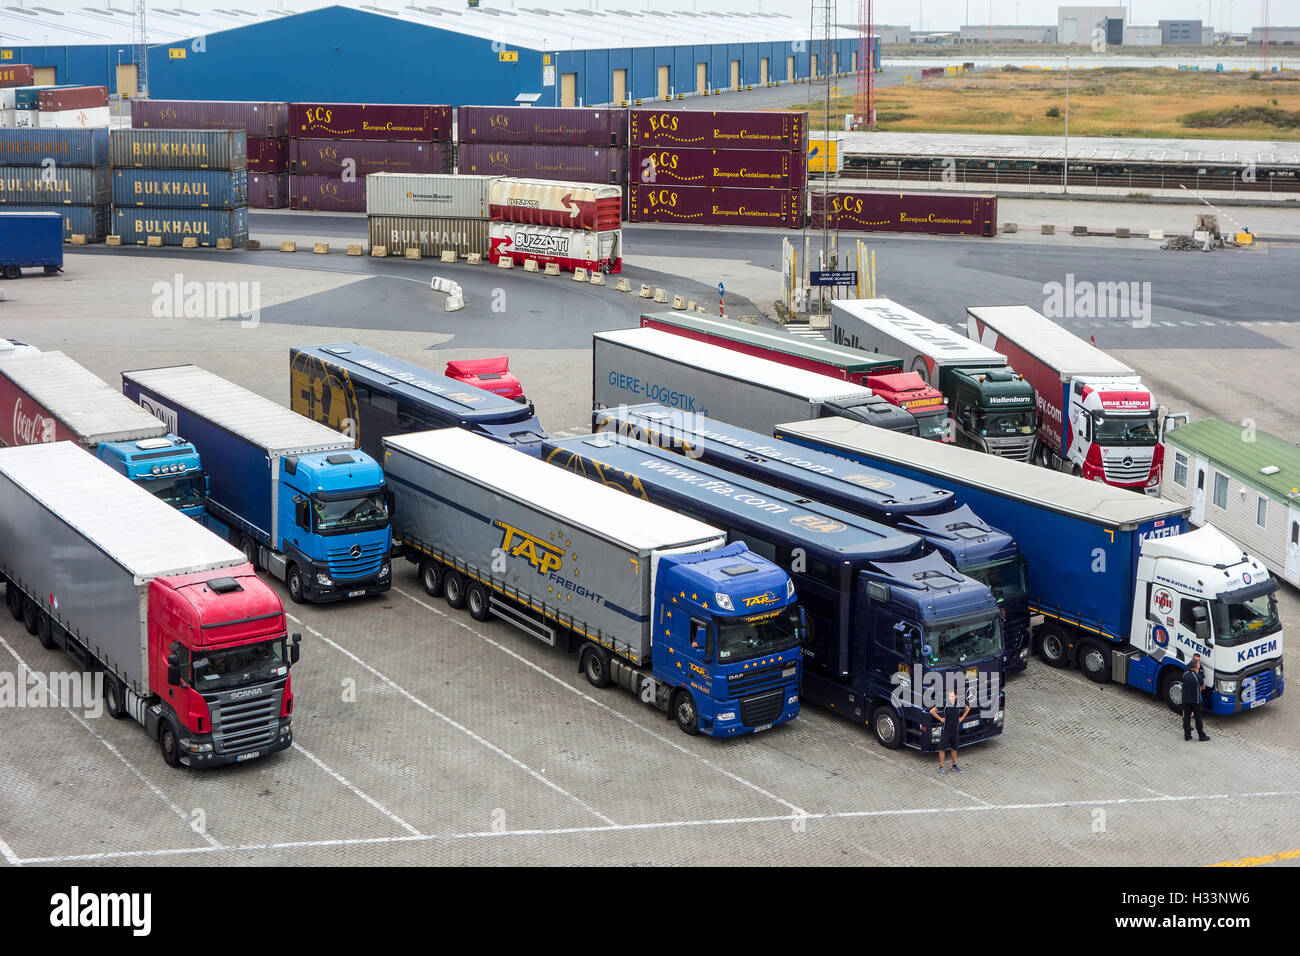 Containers and trucks waiting to board roll-on/roll-off / roro freight ship in the port of Zeebrugge, Belgium Stock Photo